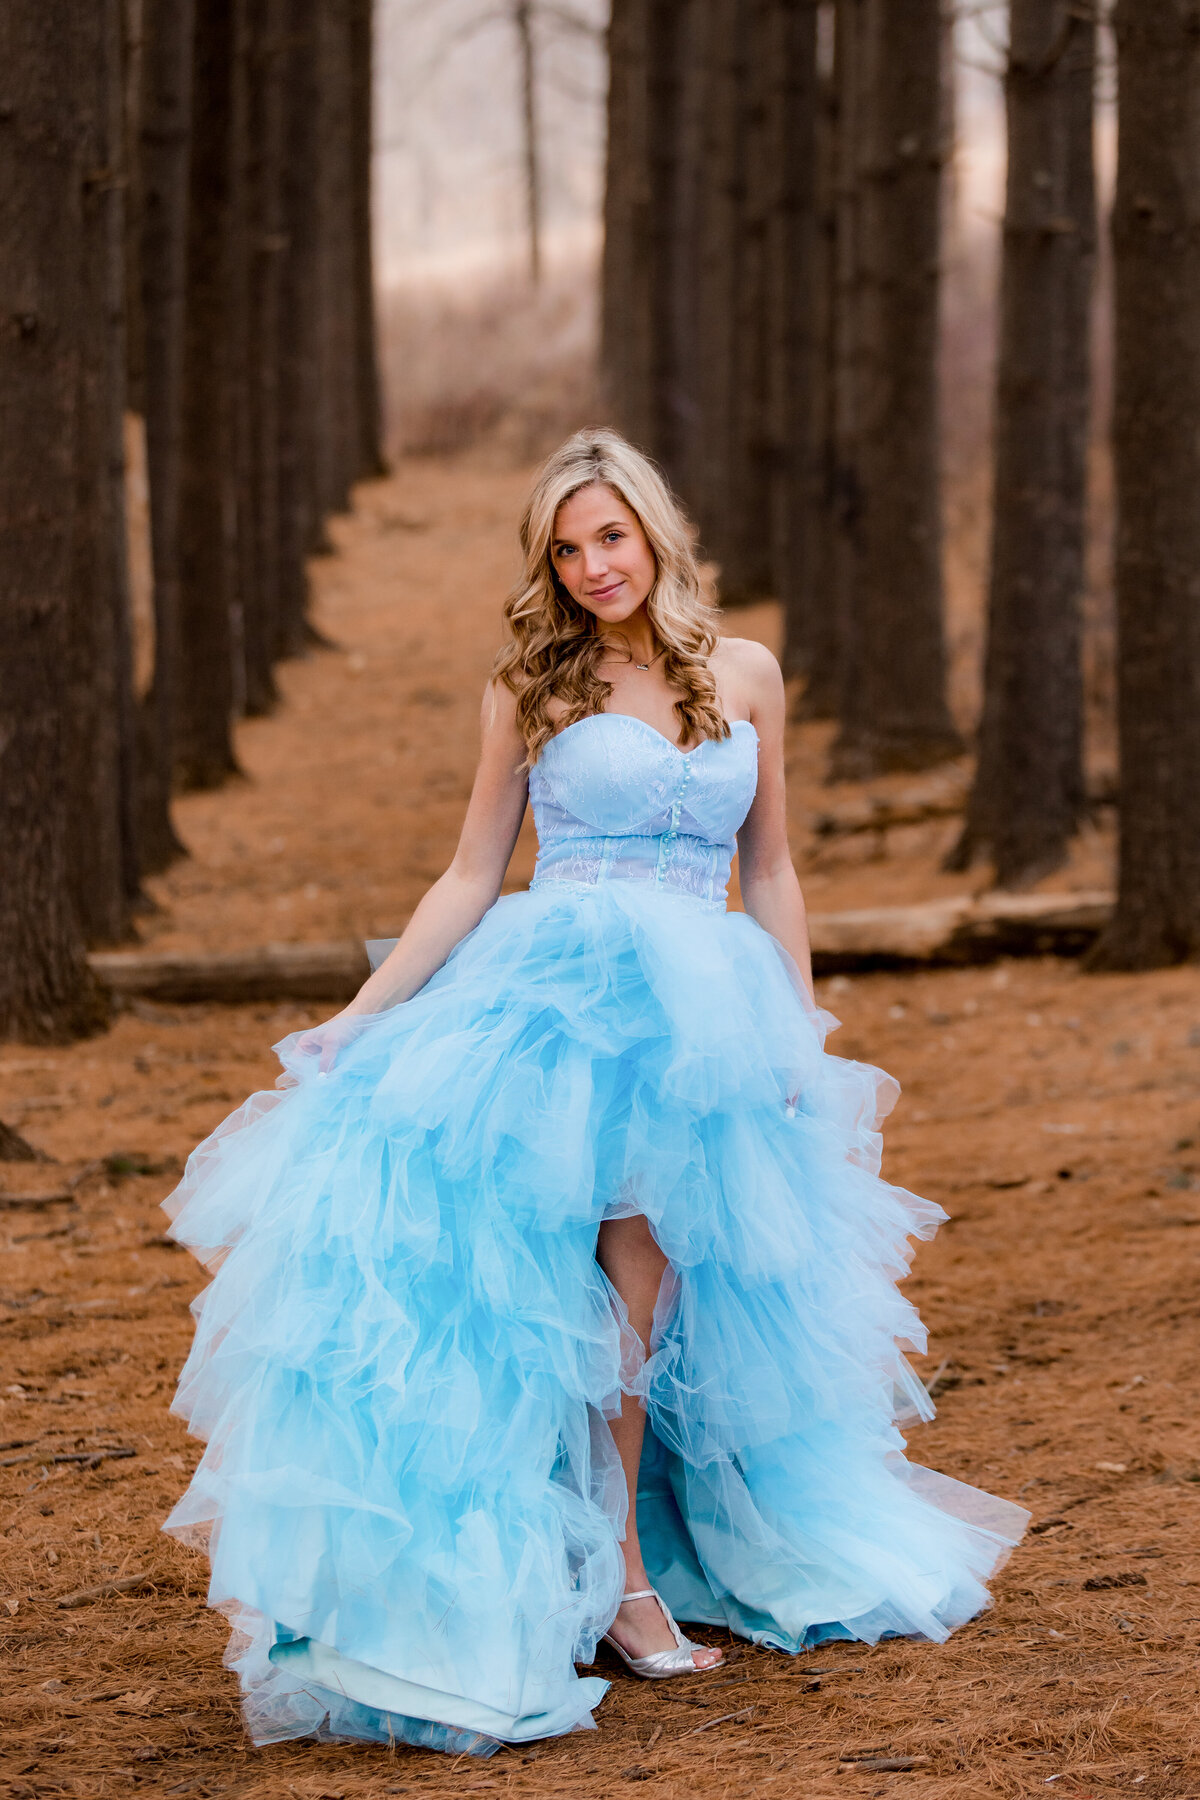 A blonde senior swirls her blue couture gown side to side while standing in rows of trees.